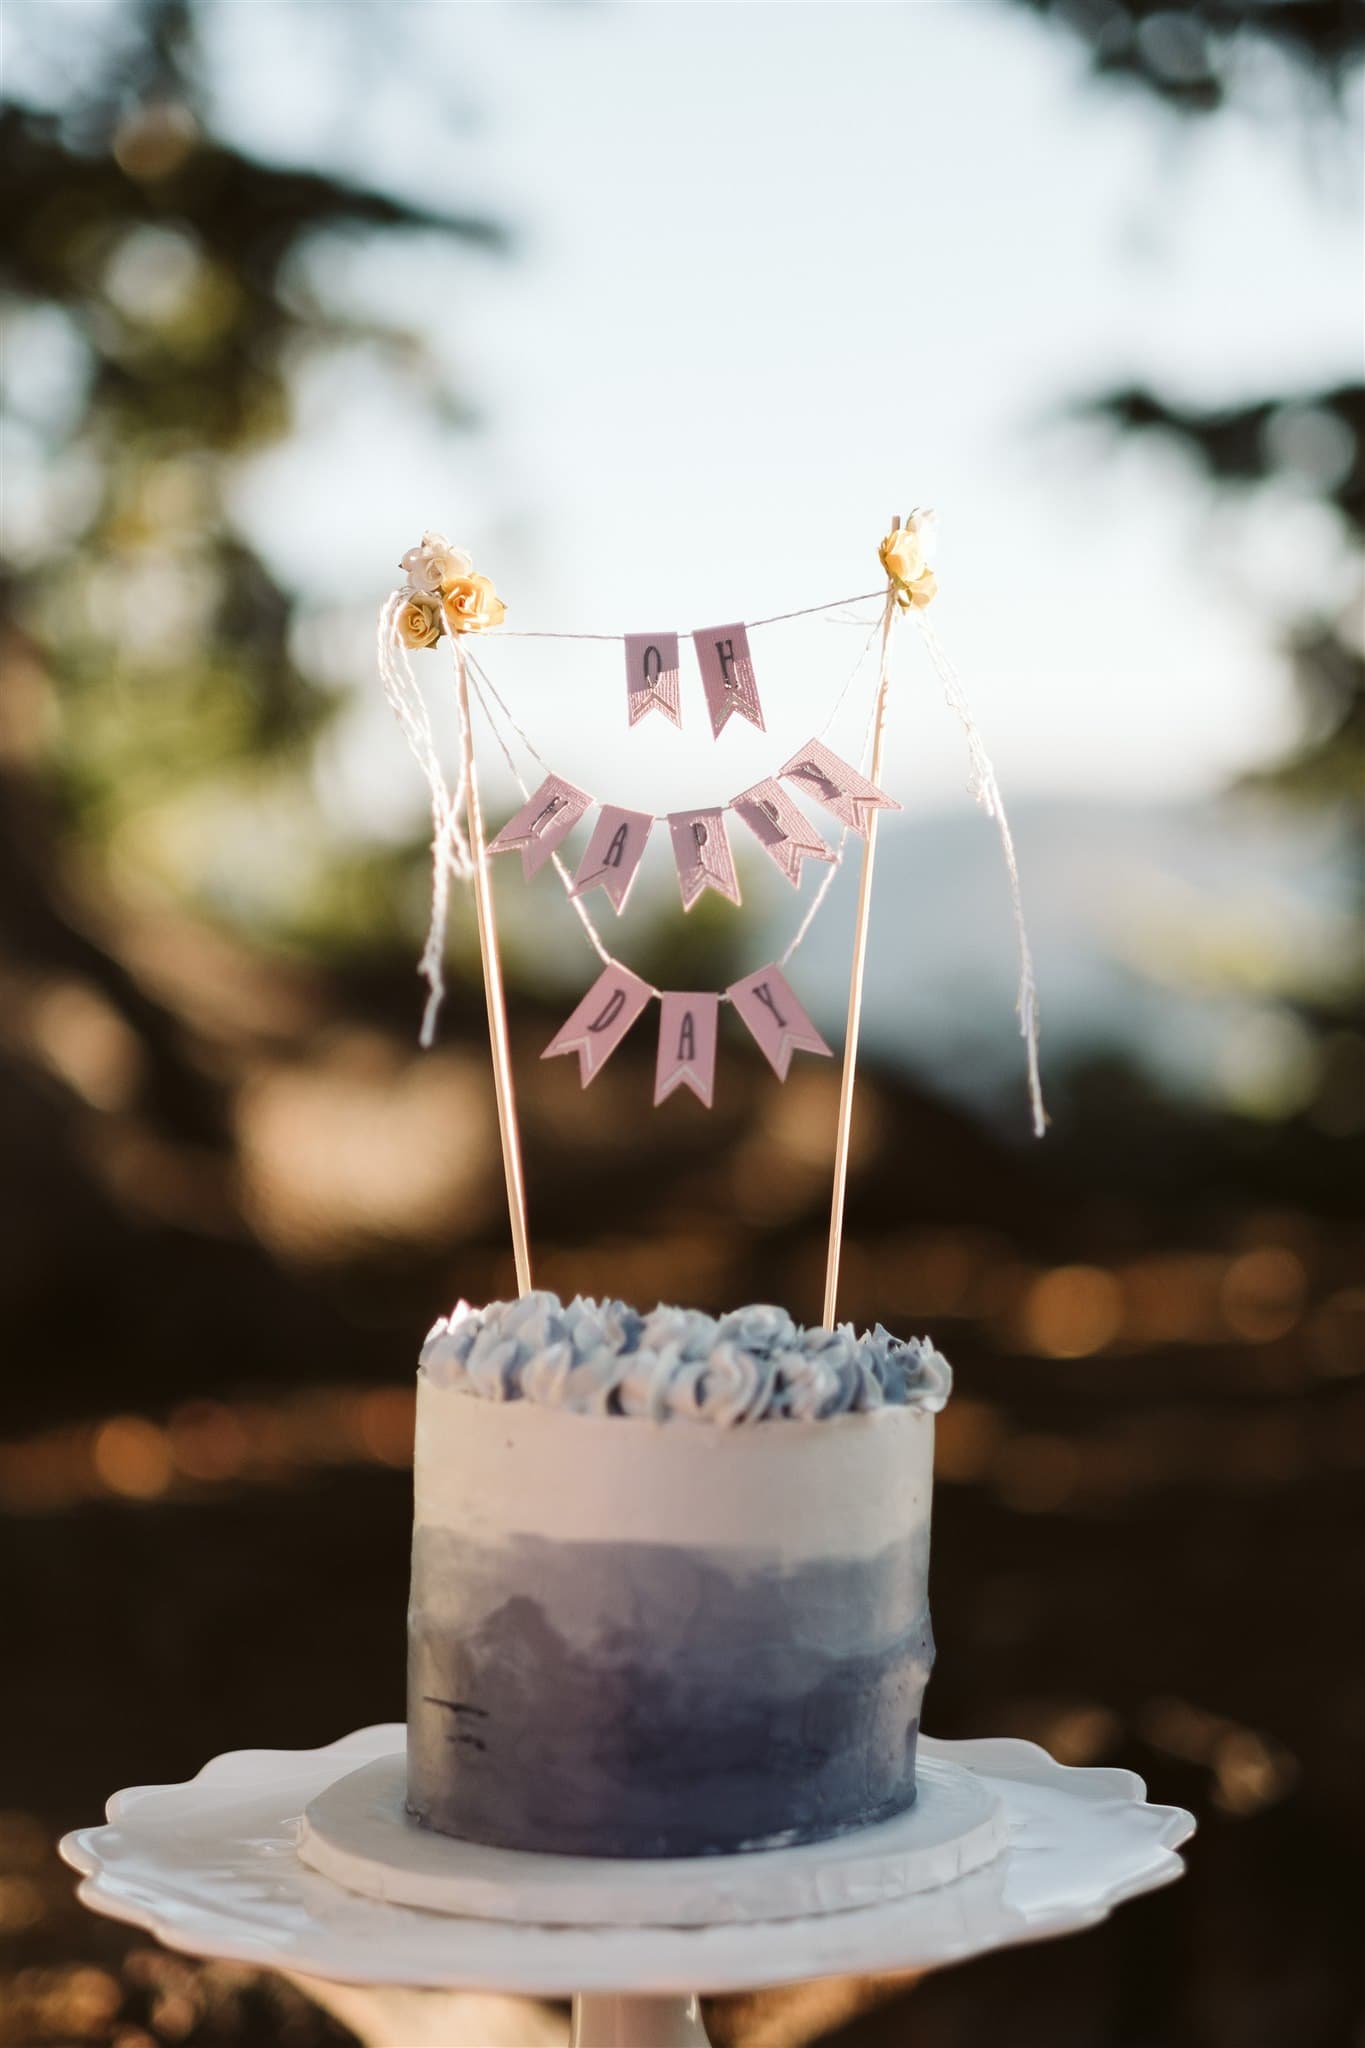 Elopement cake with "oh happy day" banner cake topper